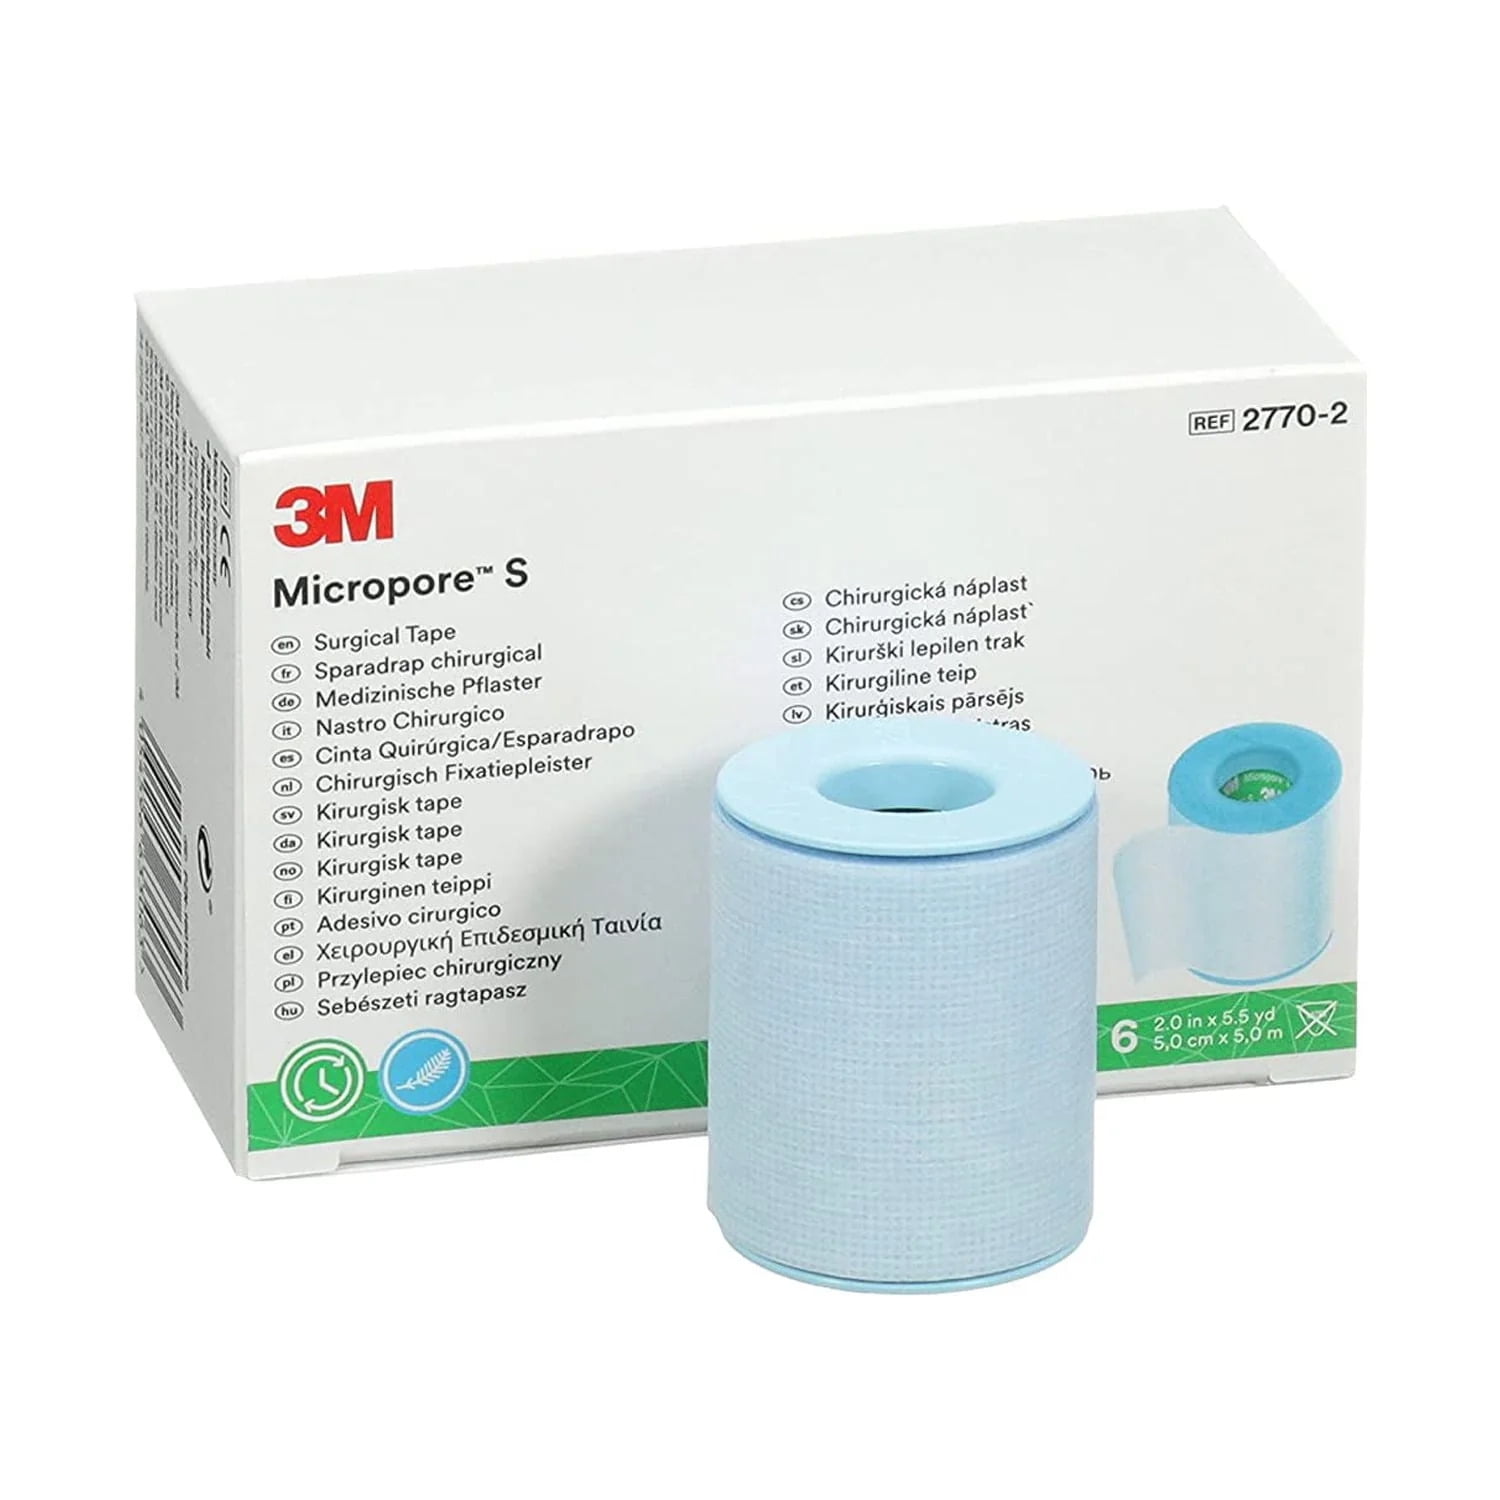 3M Micropore S Surgical Tape 2 x 5.5 yds. - 8827702 